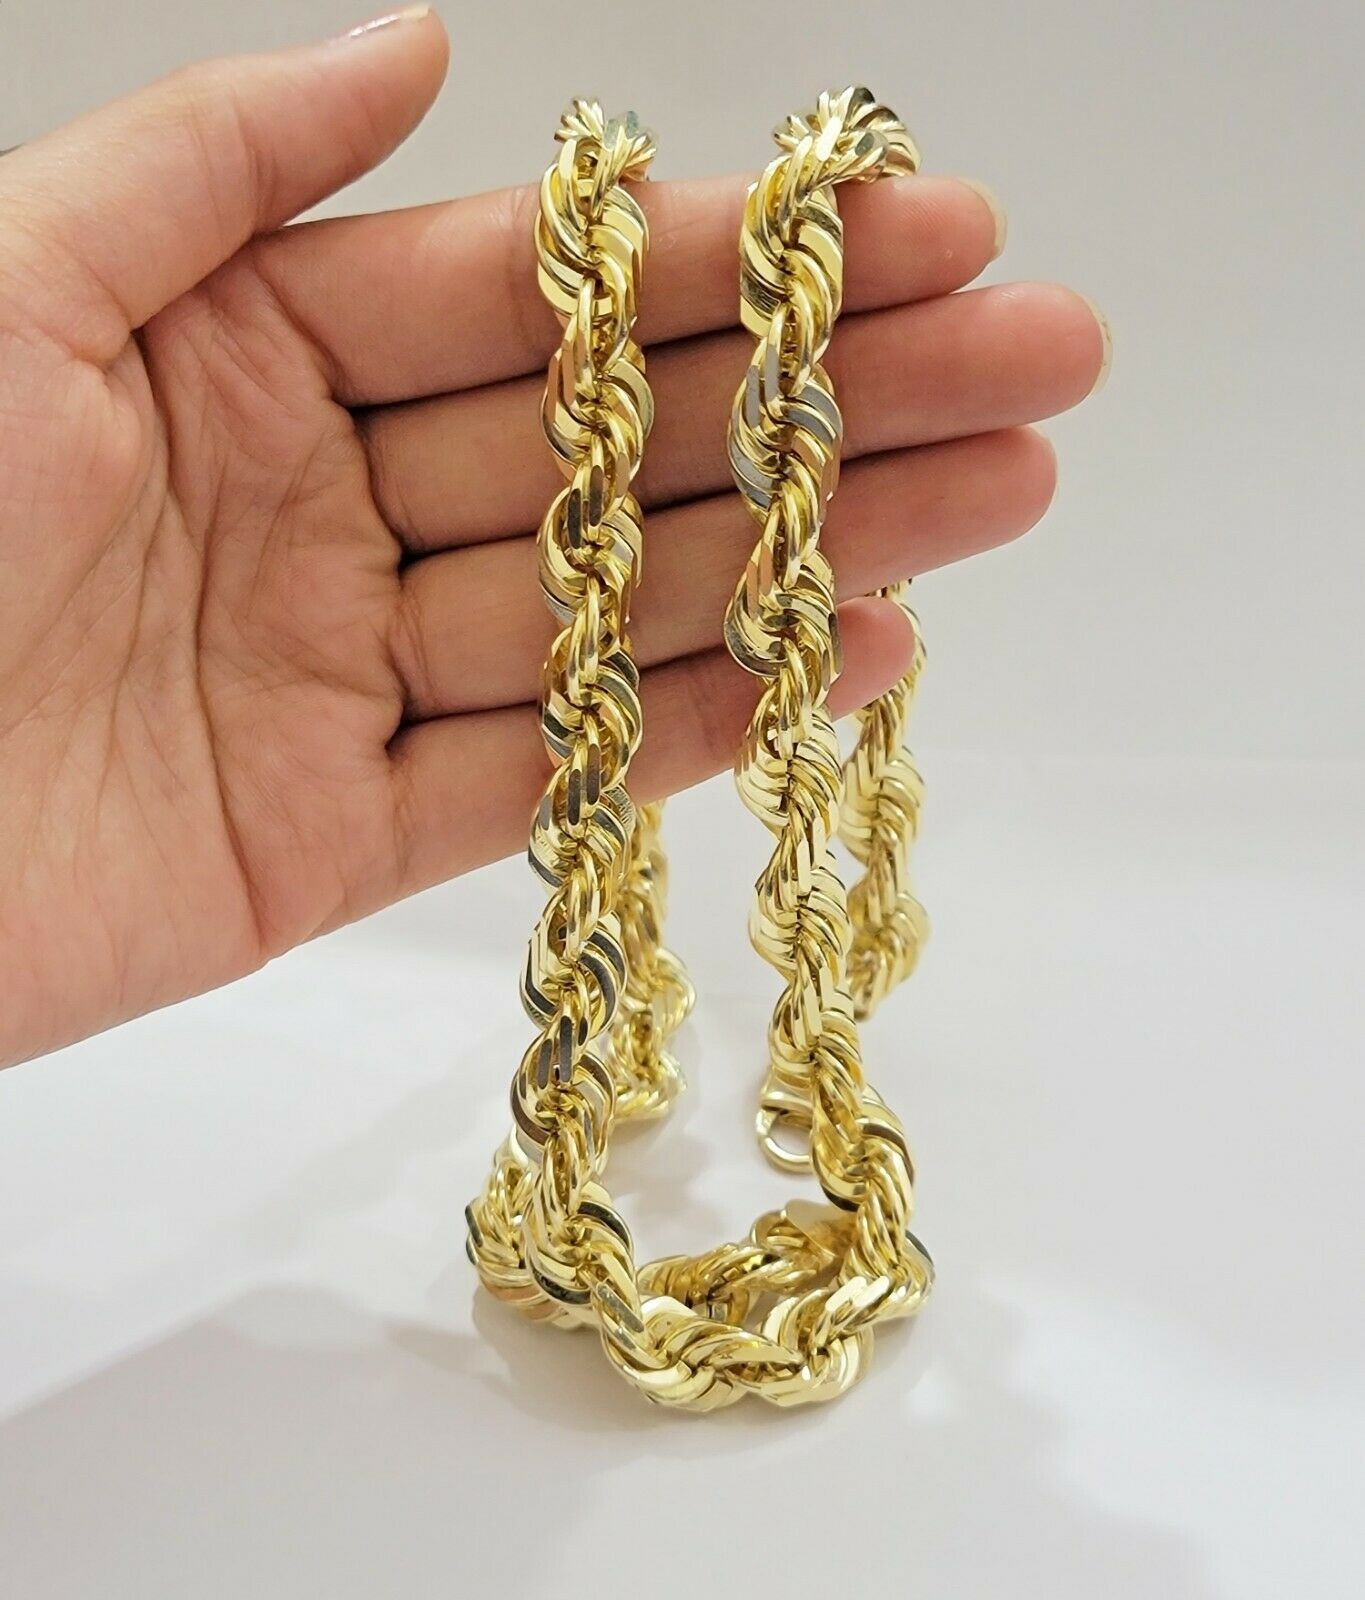 Real Solid 10K Gold Rope Chain 10mm Necklace 20 22 24 26 inch Long Diamond Cuts 24 inch